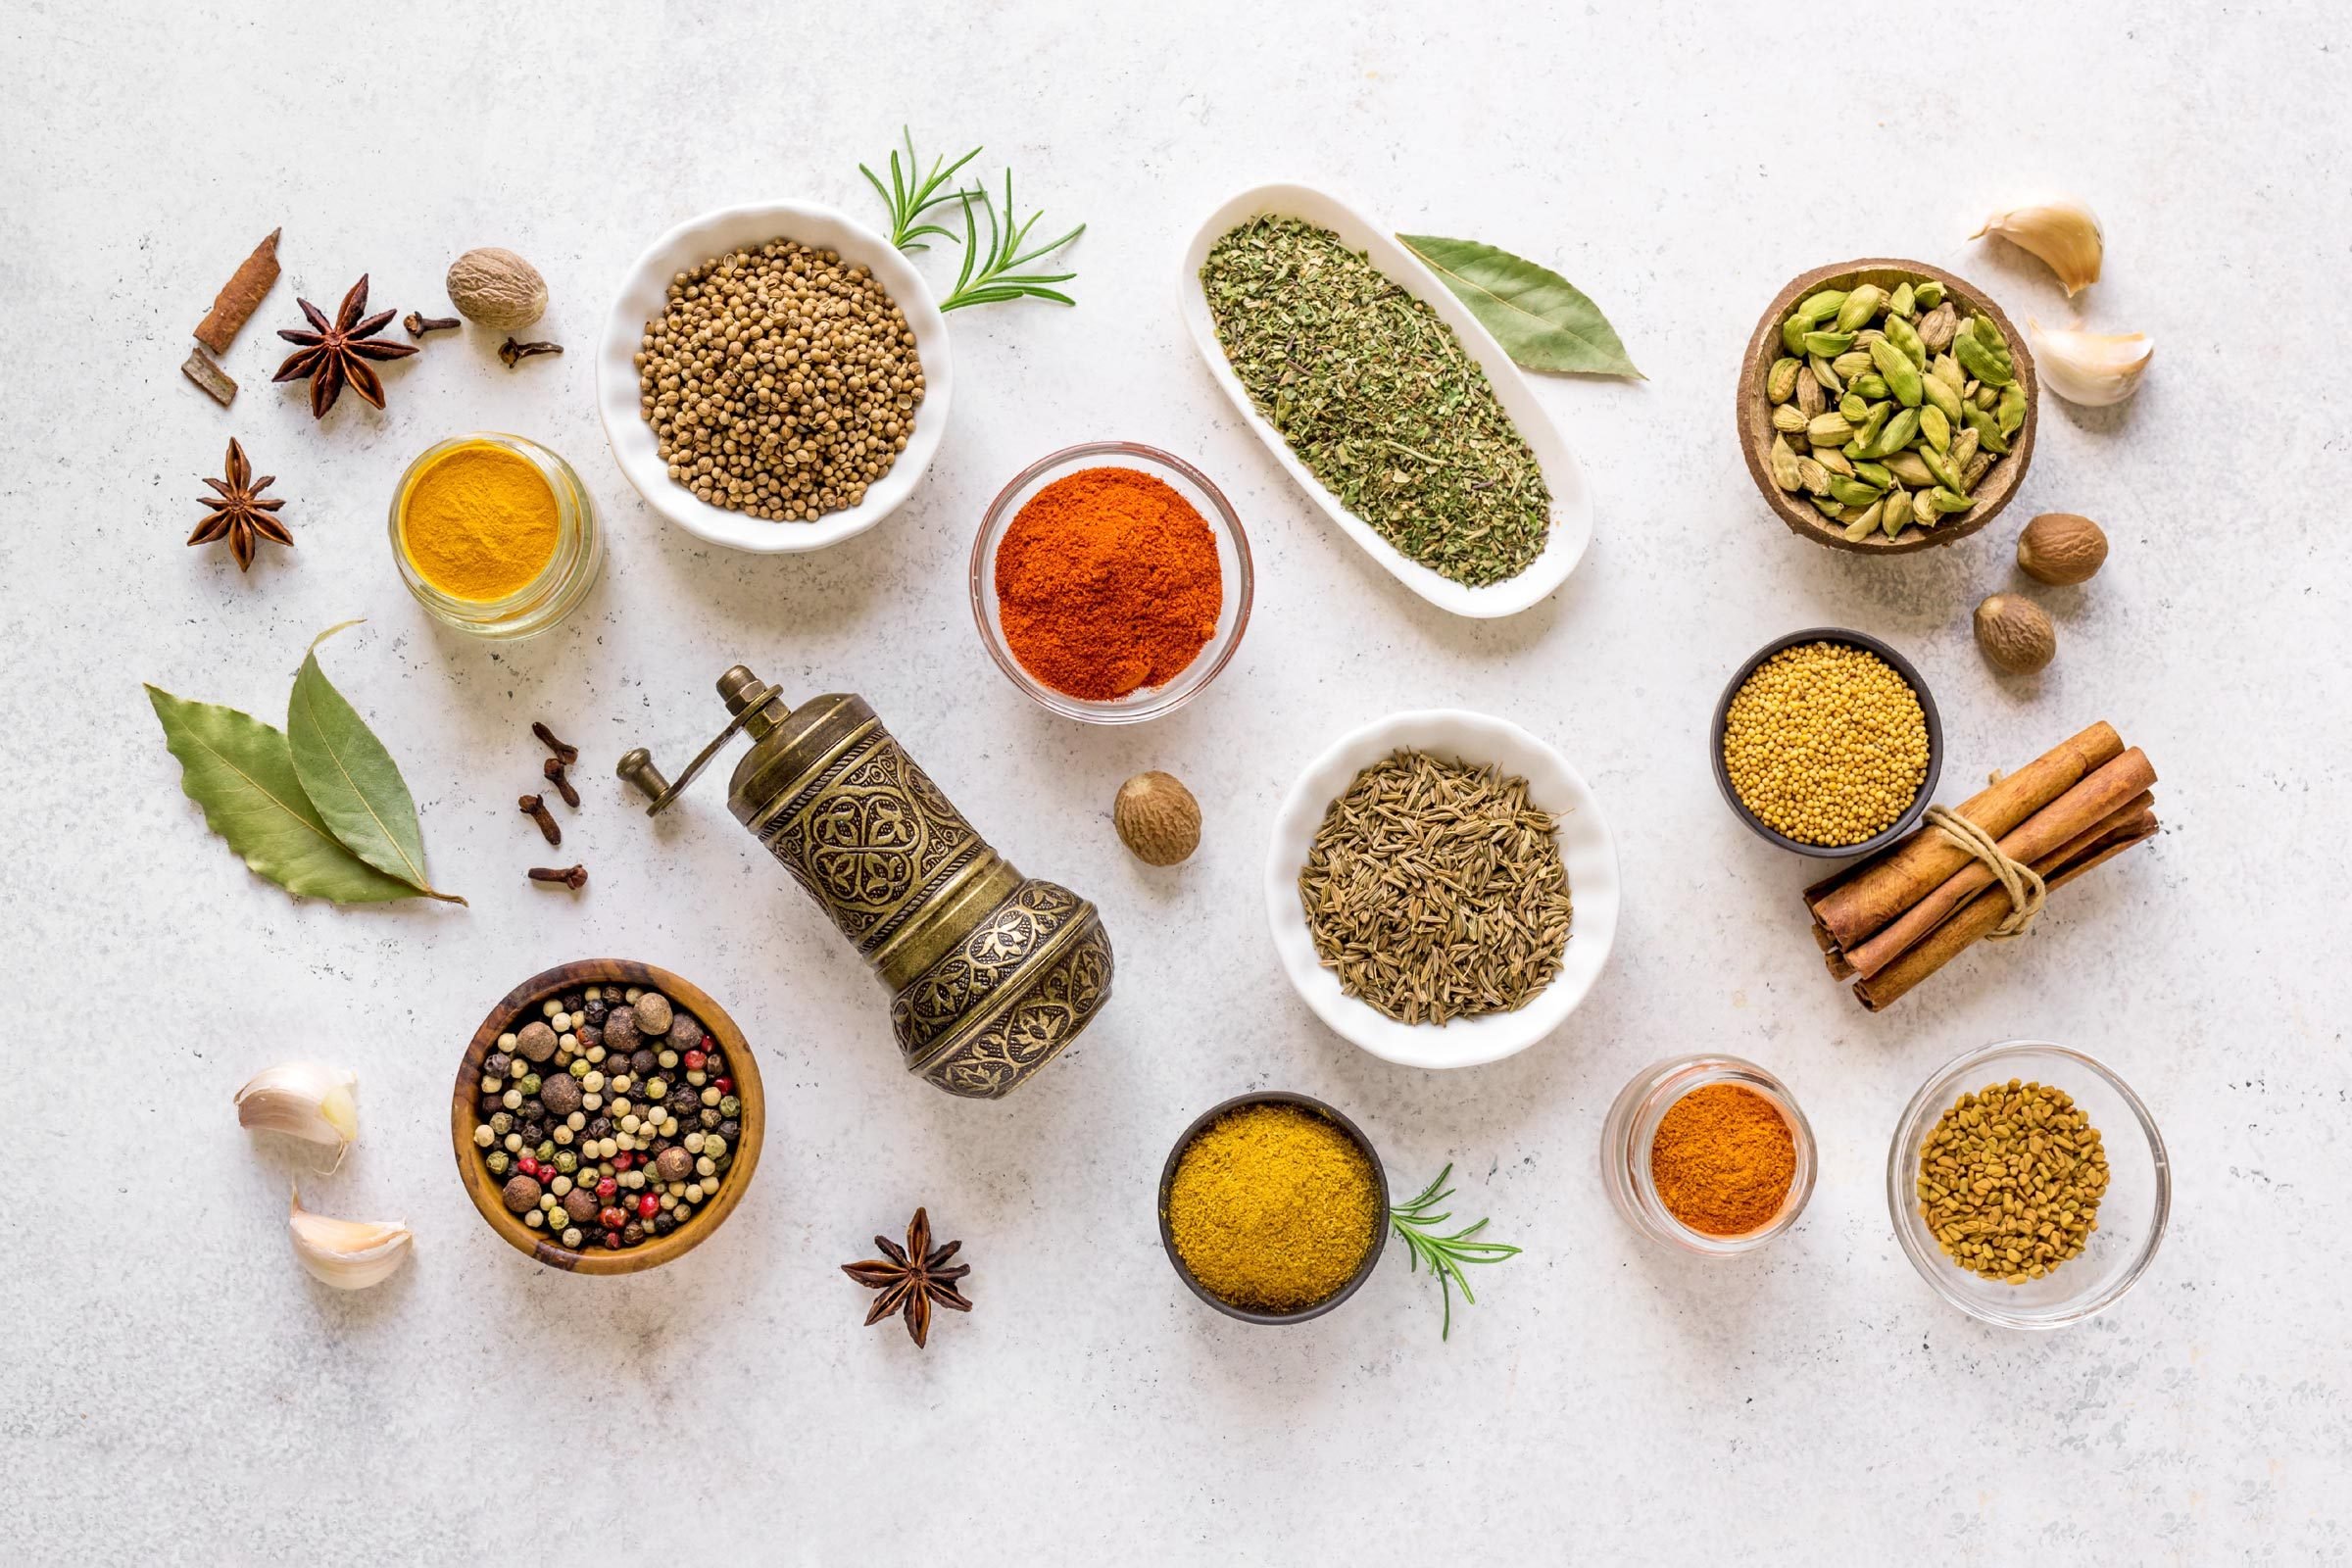 20 Aromatic Asian Herbs & Spices to Enrich Your Cooking